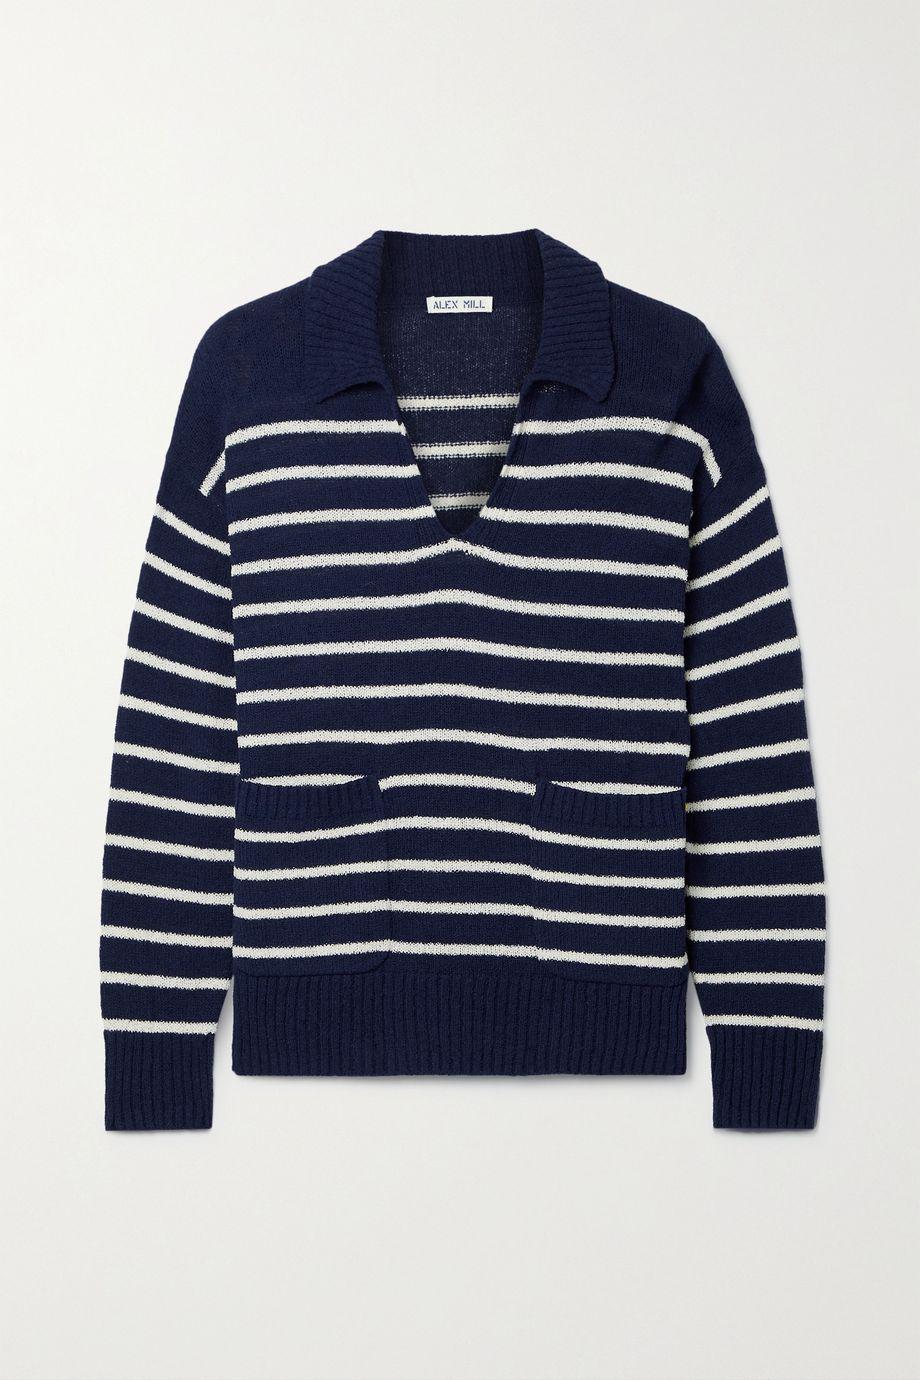 Alice striped cotton-blend sweater by ALEX MILL